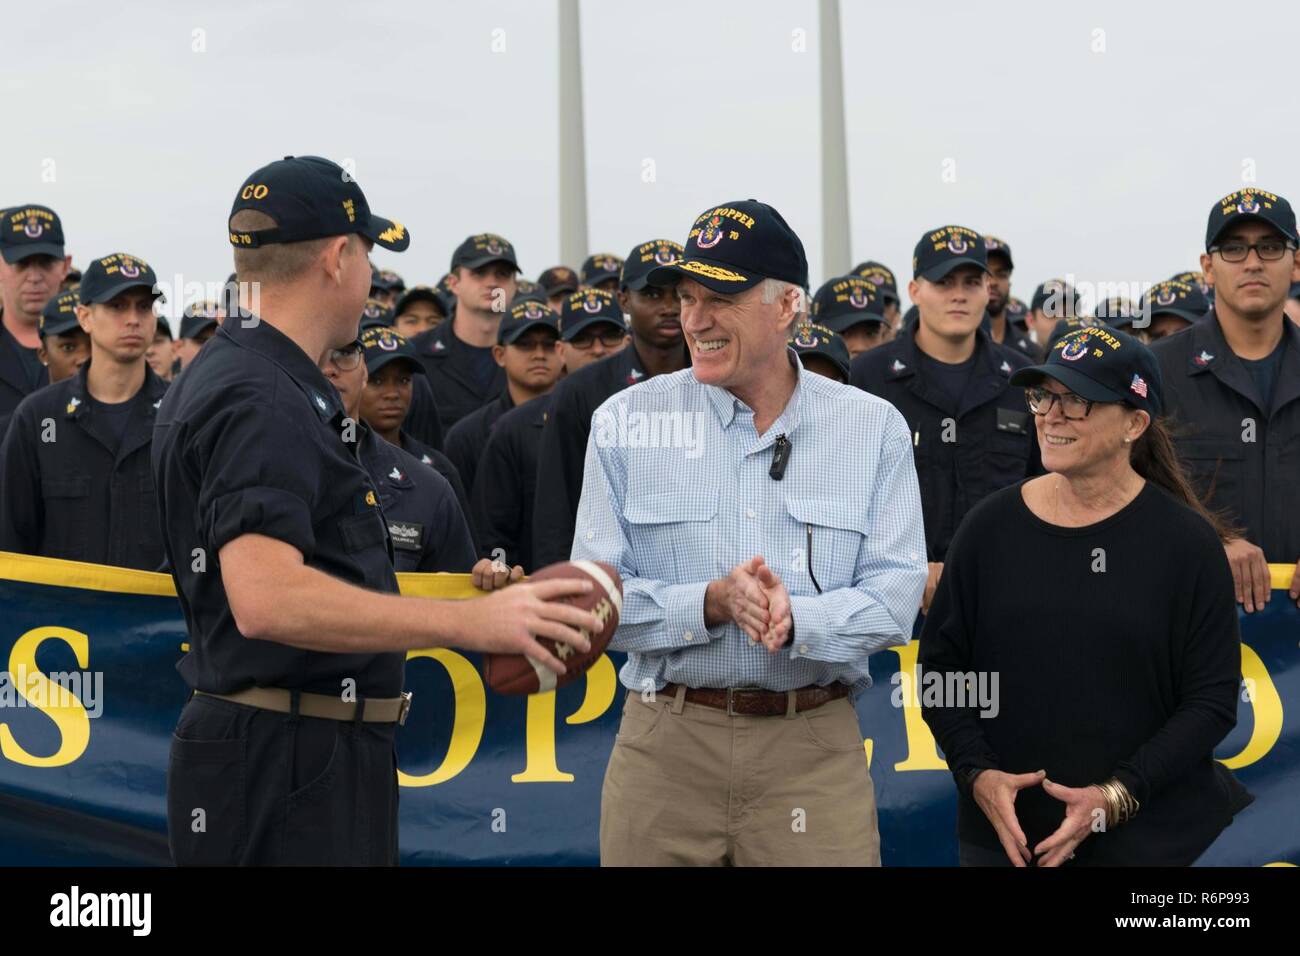 ARABIAN GULF (Nov. 23, 2017) Cmdr. Jeffrey Tamulevich (left), commanding officer of the Arleigh Burke-class guided-missile destroyer USS Hopper (DDG 70), speaks with the Secretary of the Navy (SECNAV) Richard V. Spencer and his wife, Sarah Pauline Spencer, prior to the filming of a spirit spot on the ship’s flight deck for the upcoming Navy vs. Army game, during the SECNAV’s visit to the ship on Thanksgiving Day. Hopper is deployed to the U.S. 5th Fleet area of operations in support of maritime security operations to reassure allies and partners and preserve the freedom of navigation and the f Stock Photo